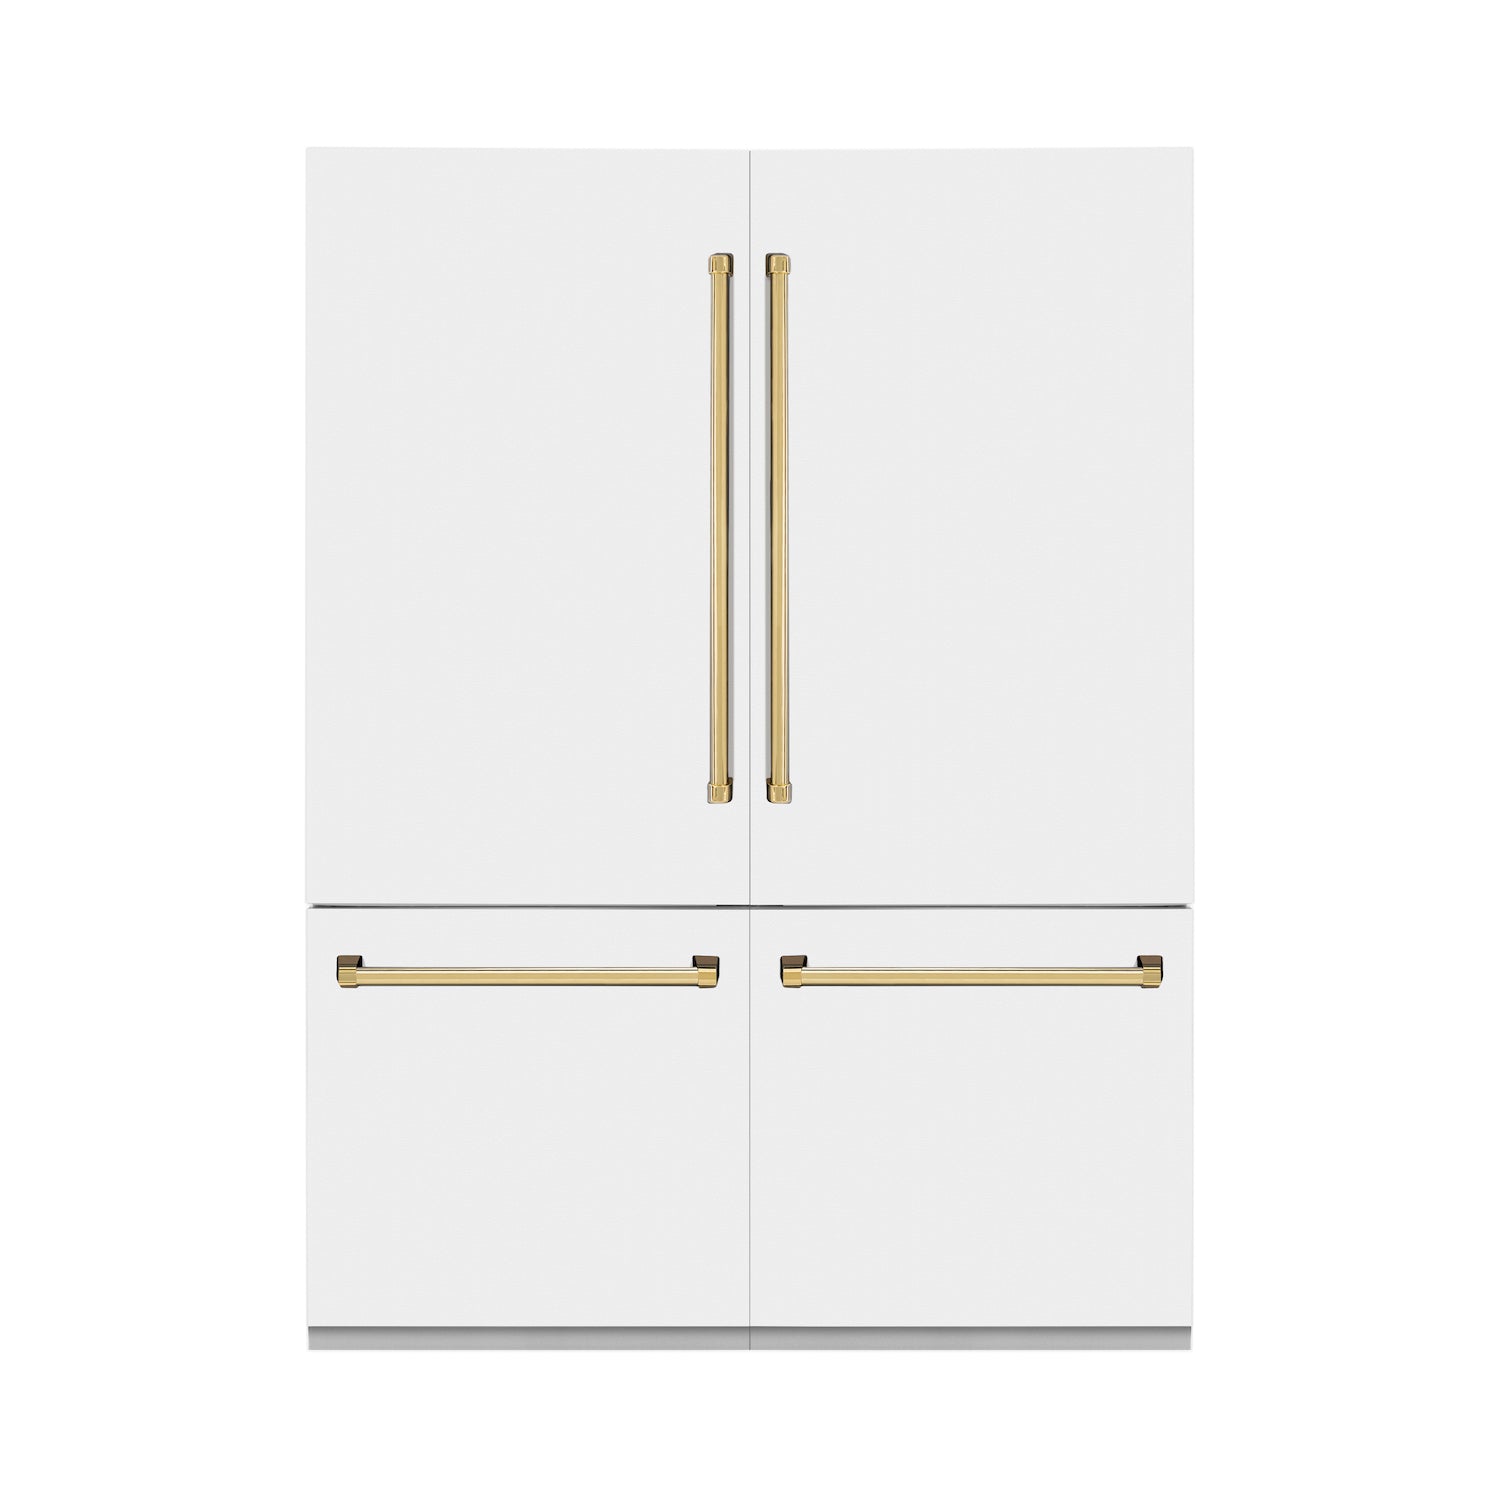 ZLINE 60" Autograph Edition Built-in 4-Door French Door Refrigerator - Matte White with Accents, Internal Water and Ice Dispenser